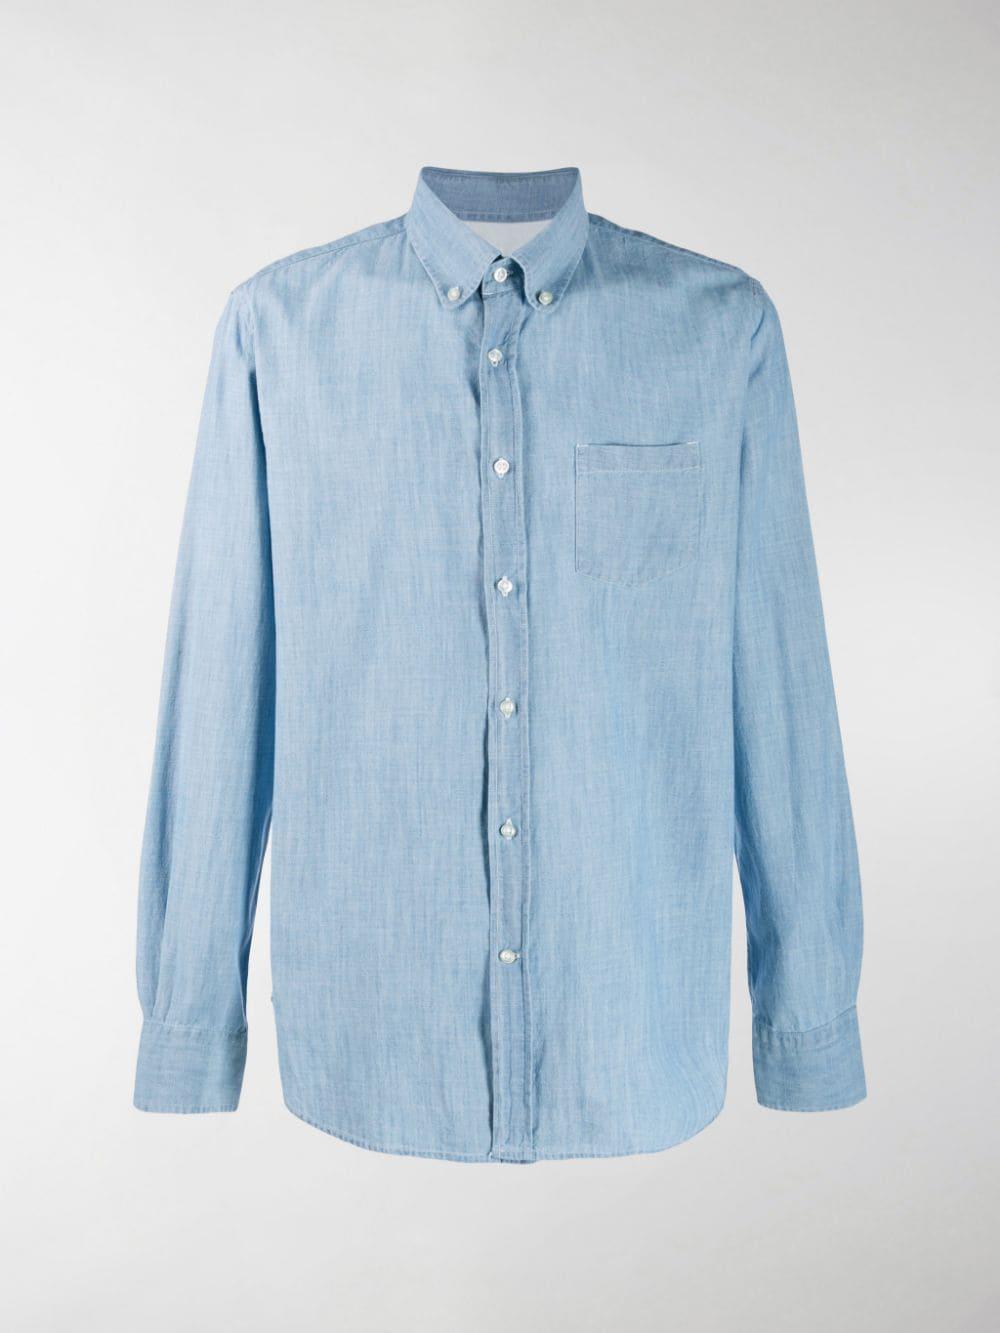 Officine Generale Cotton Antime Chambray Shirt in Blue for Men - Lyst